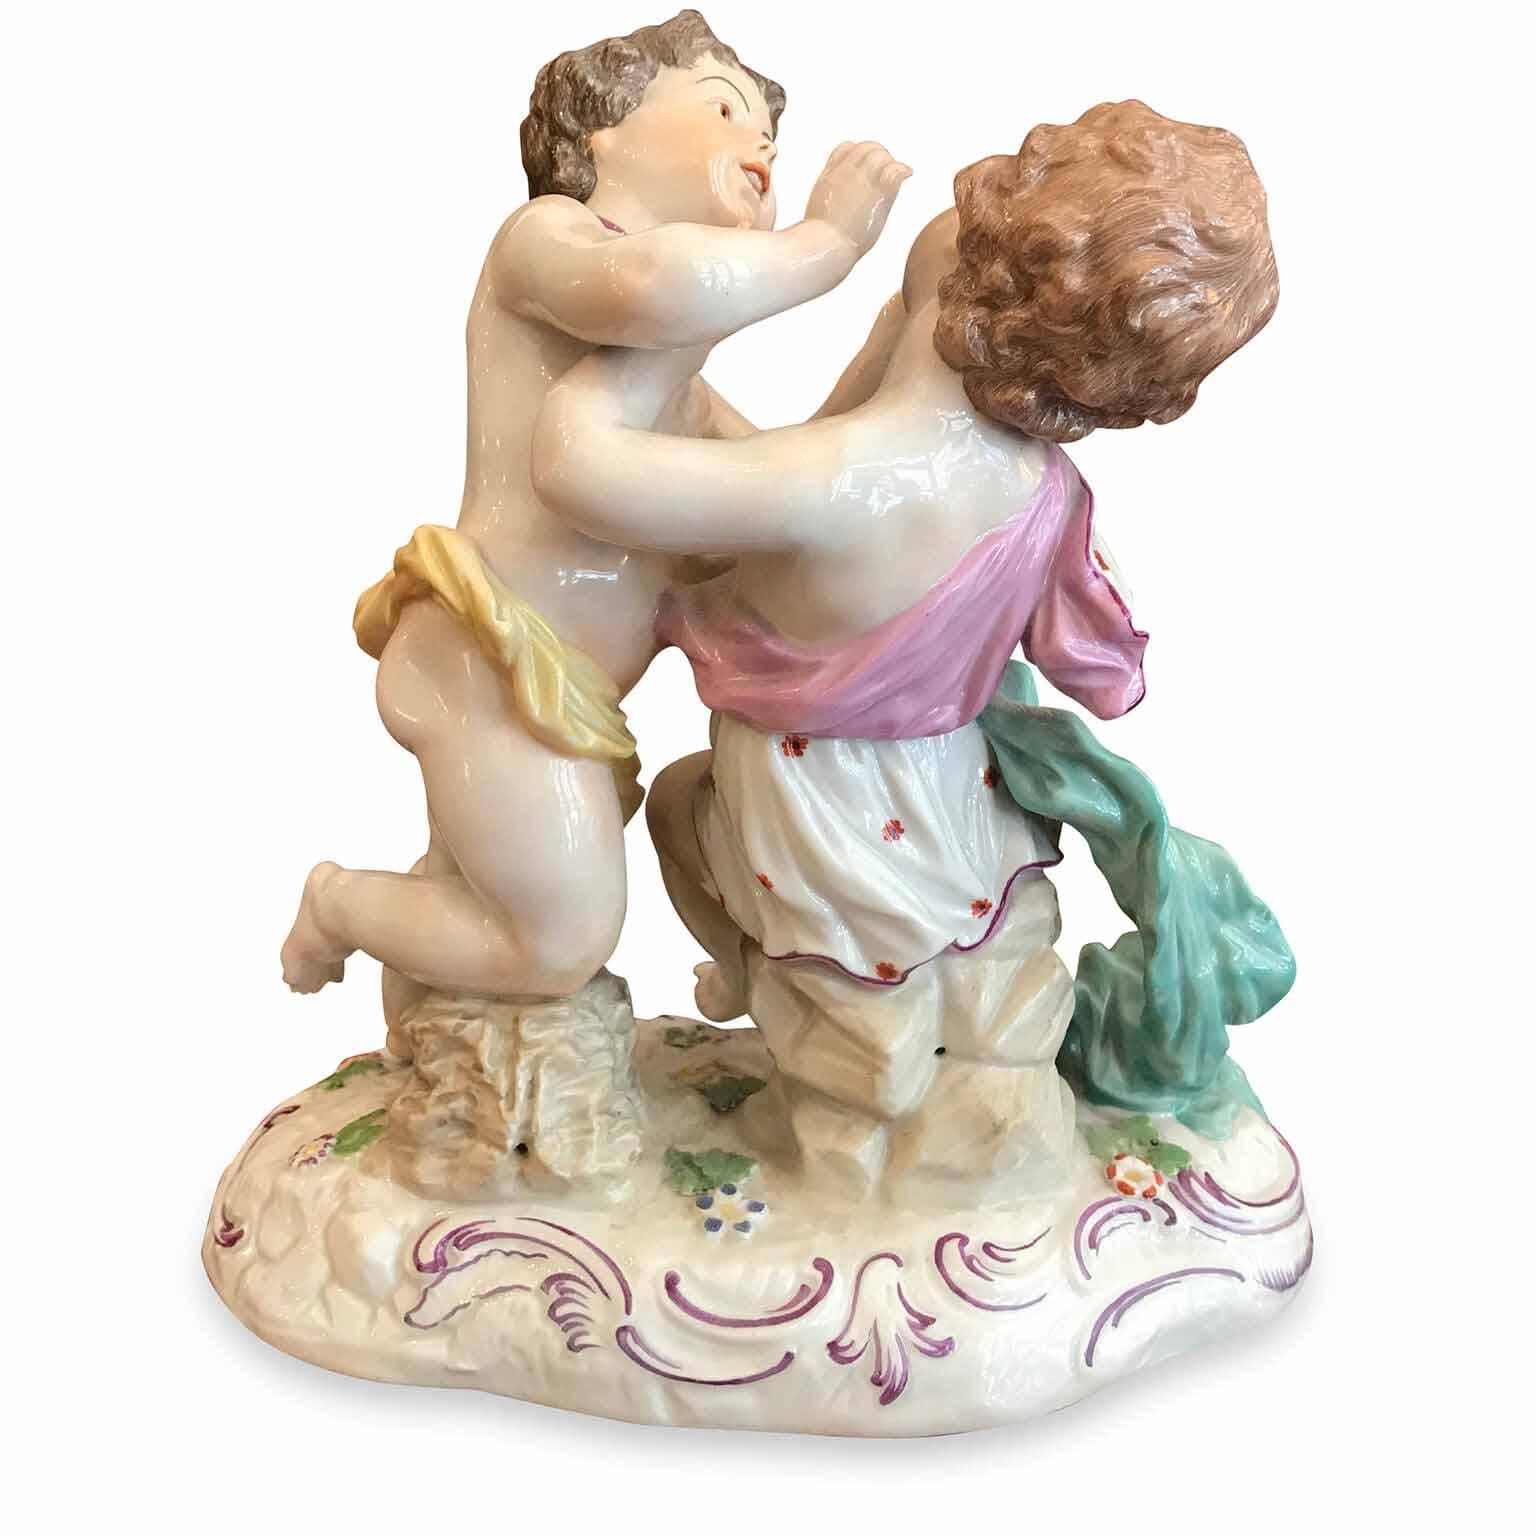 A 20th century bright and polychrome Passau German Porcelain group with Cherubs, a very decorative antique German porcelain sculpture featuring two playing cherubs on an oval base. . 
This antique German hand painted figural porcelain shows the